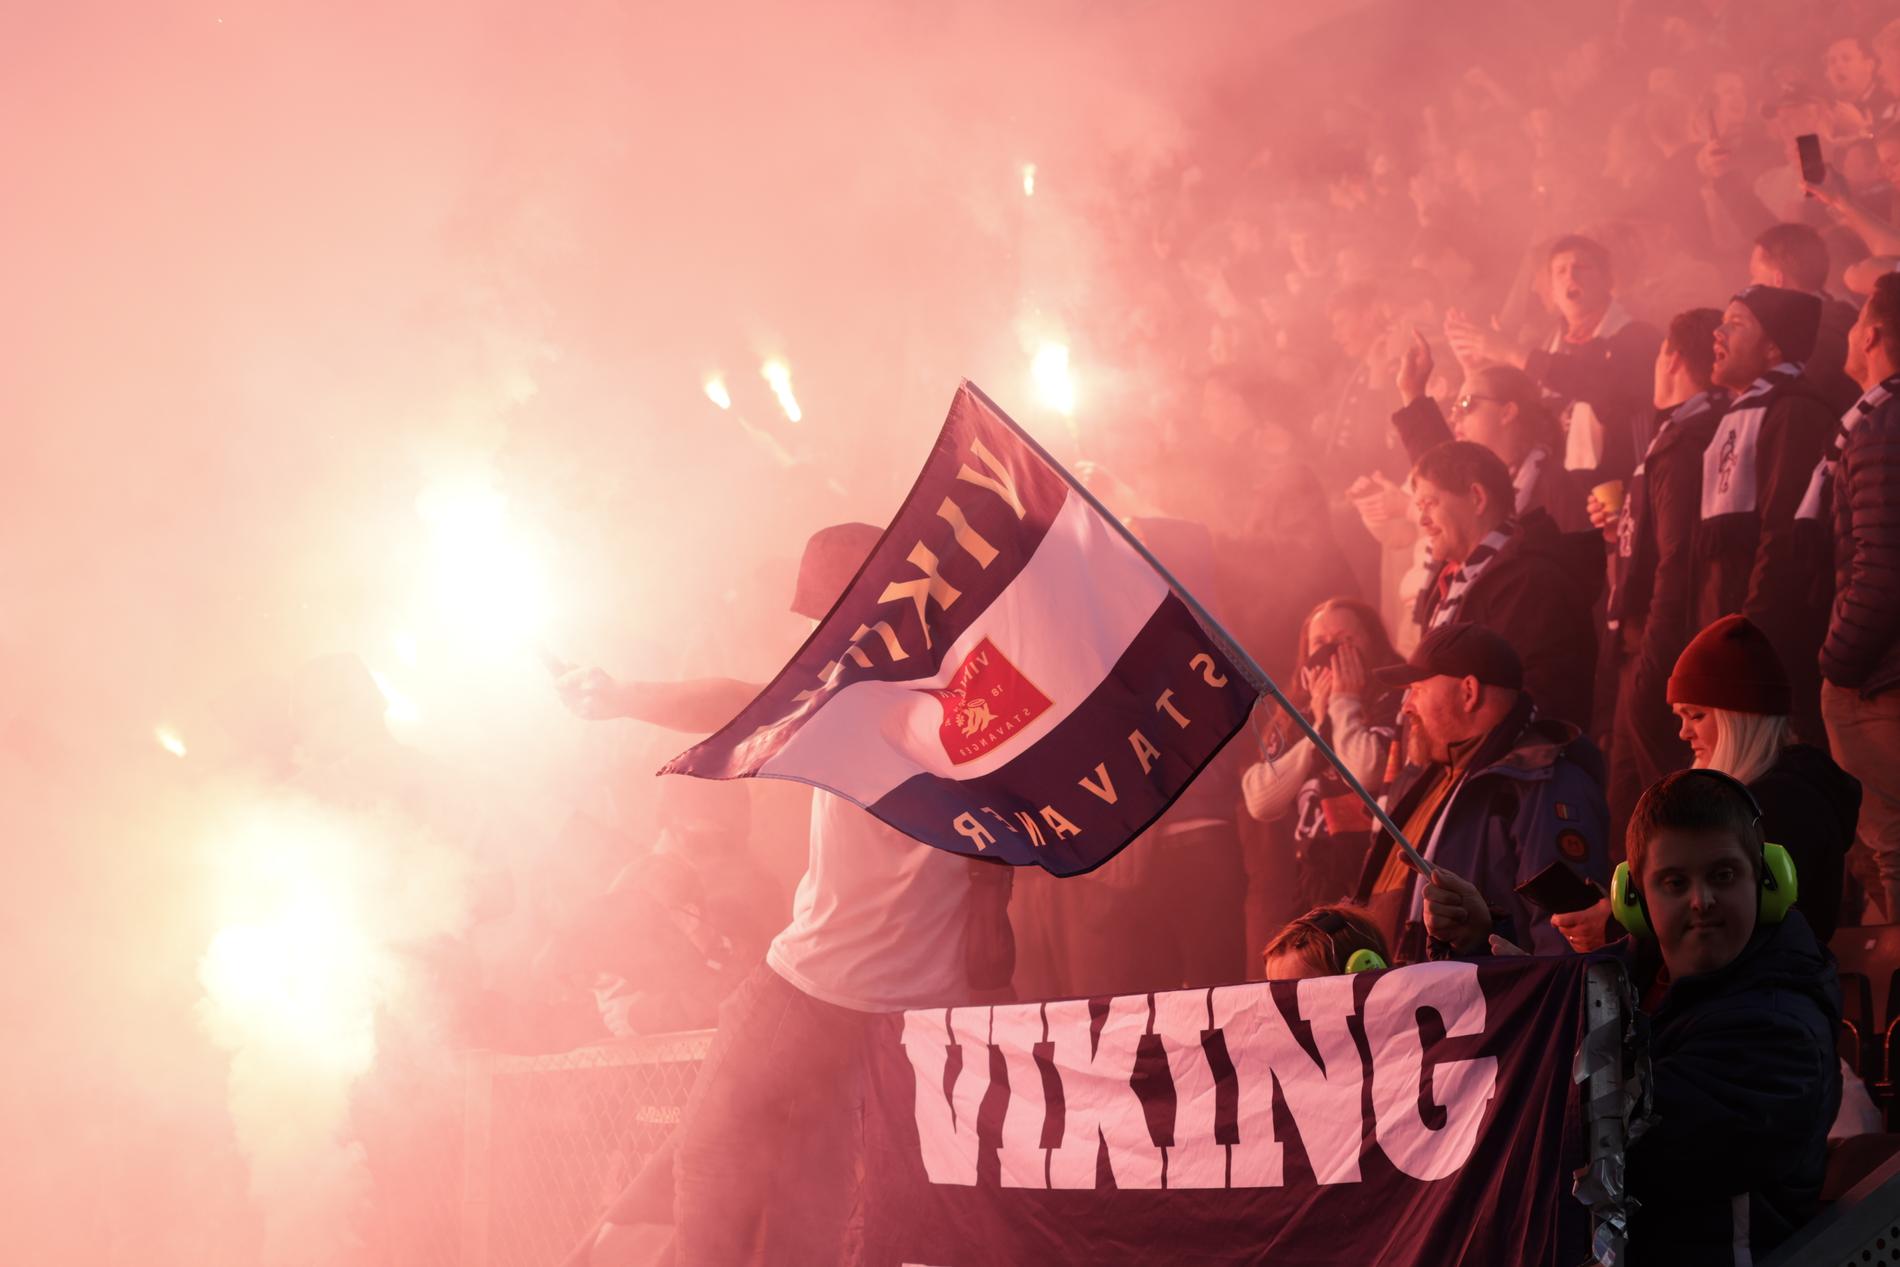 Cook: More than 1,000 fans found their way to Skien Arena and Skagerrak. 